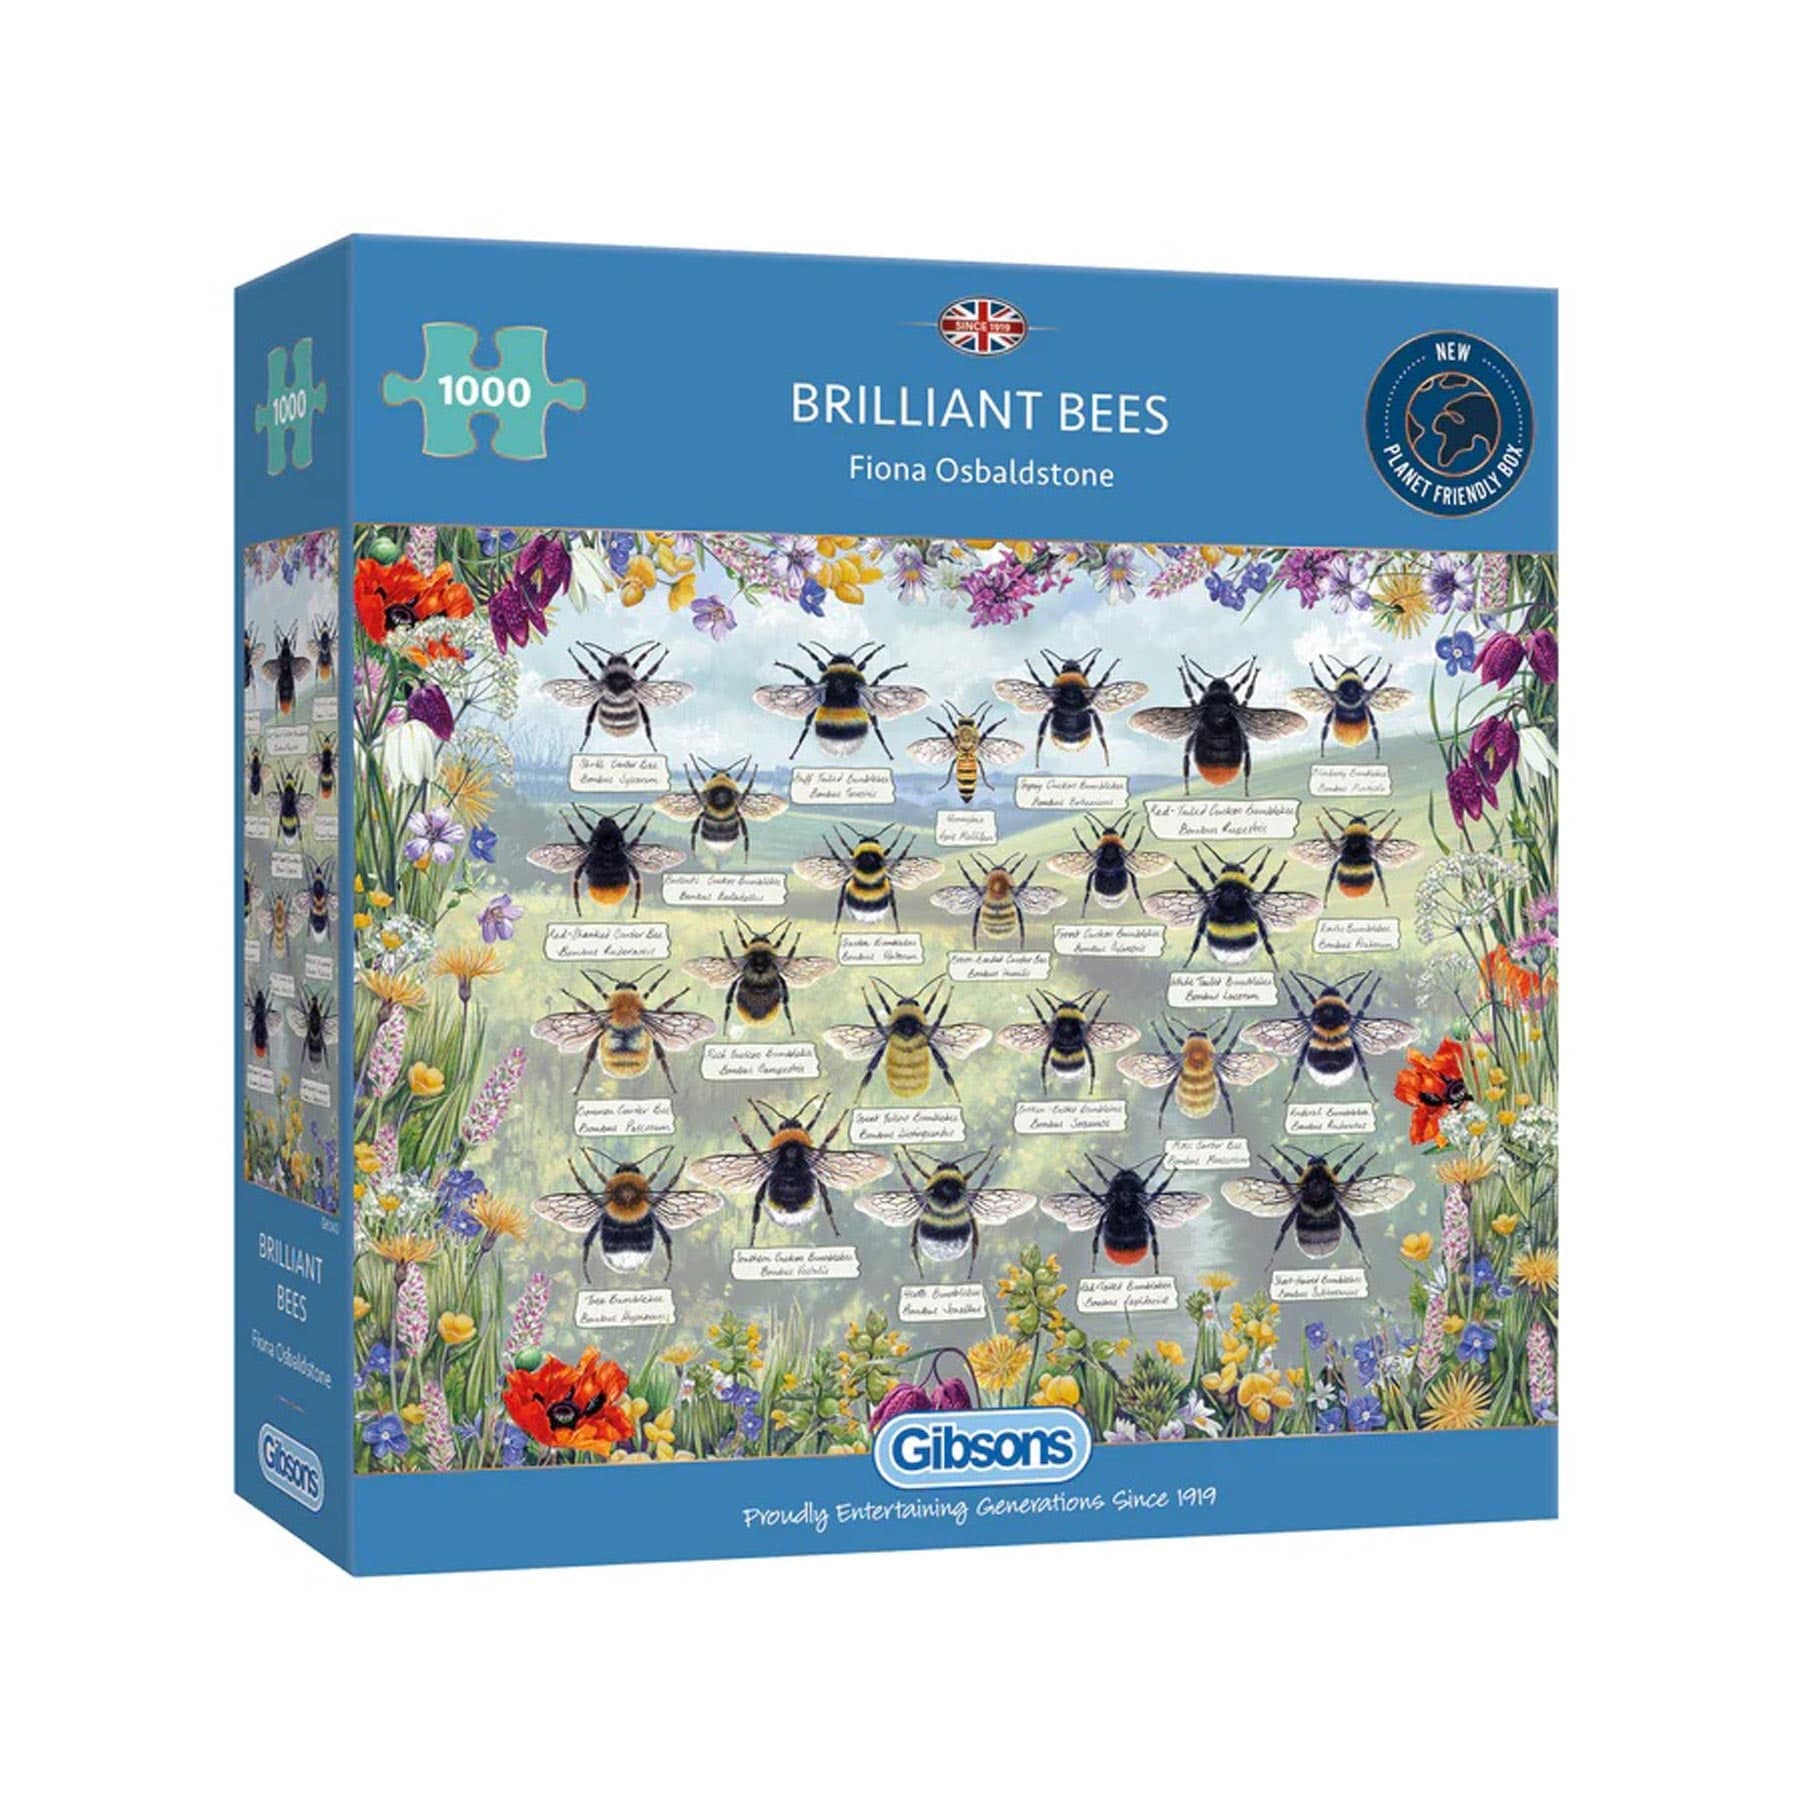 Brilliant bees 1000 piece jigsaw puzzle